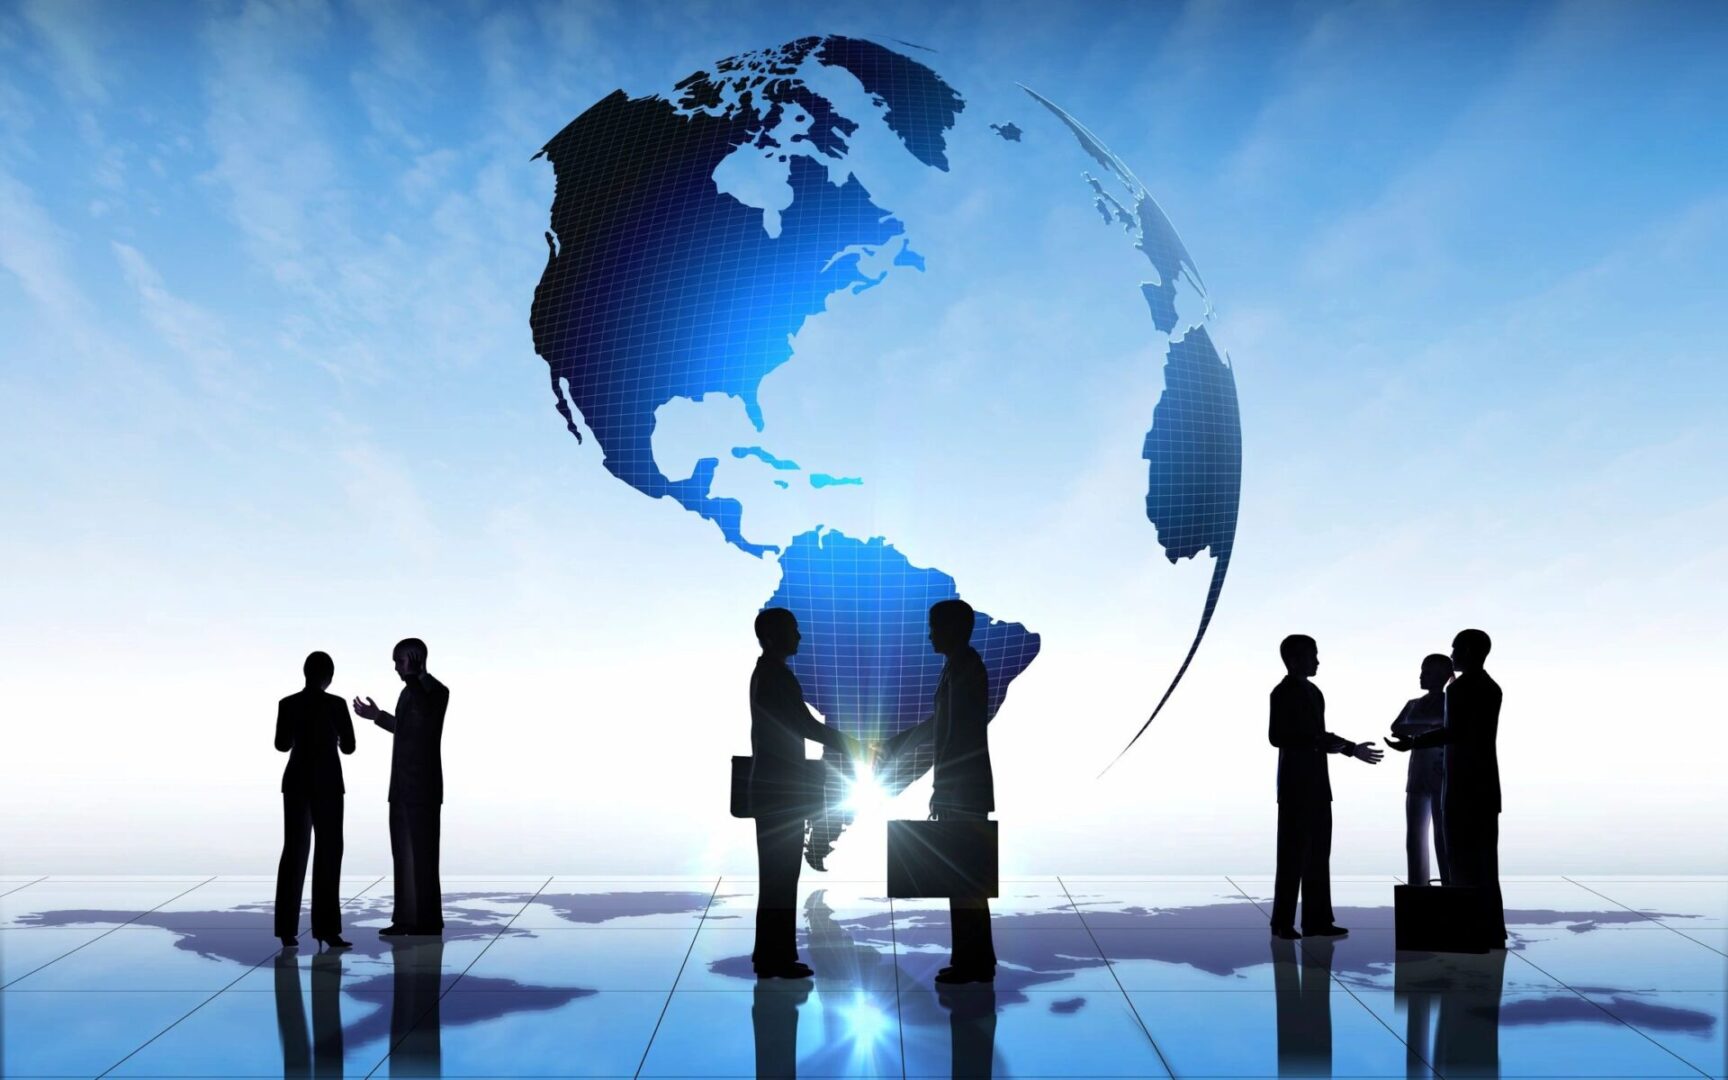 Global Business people team silhouettes rendered by computer graphic